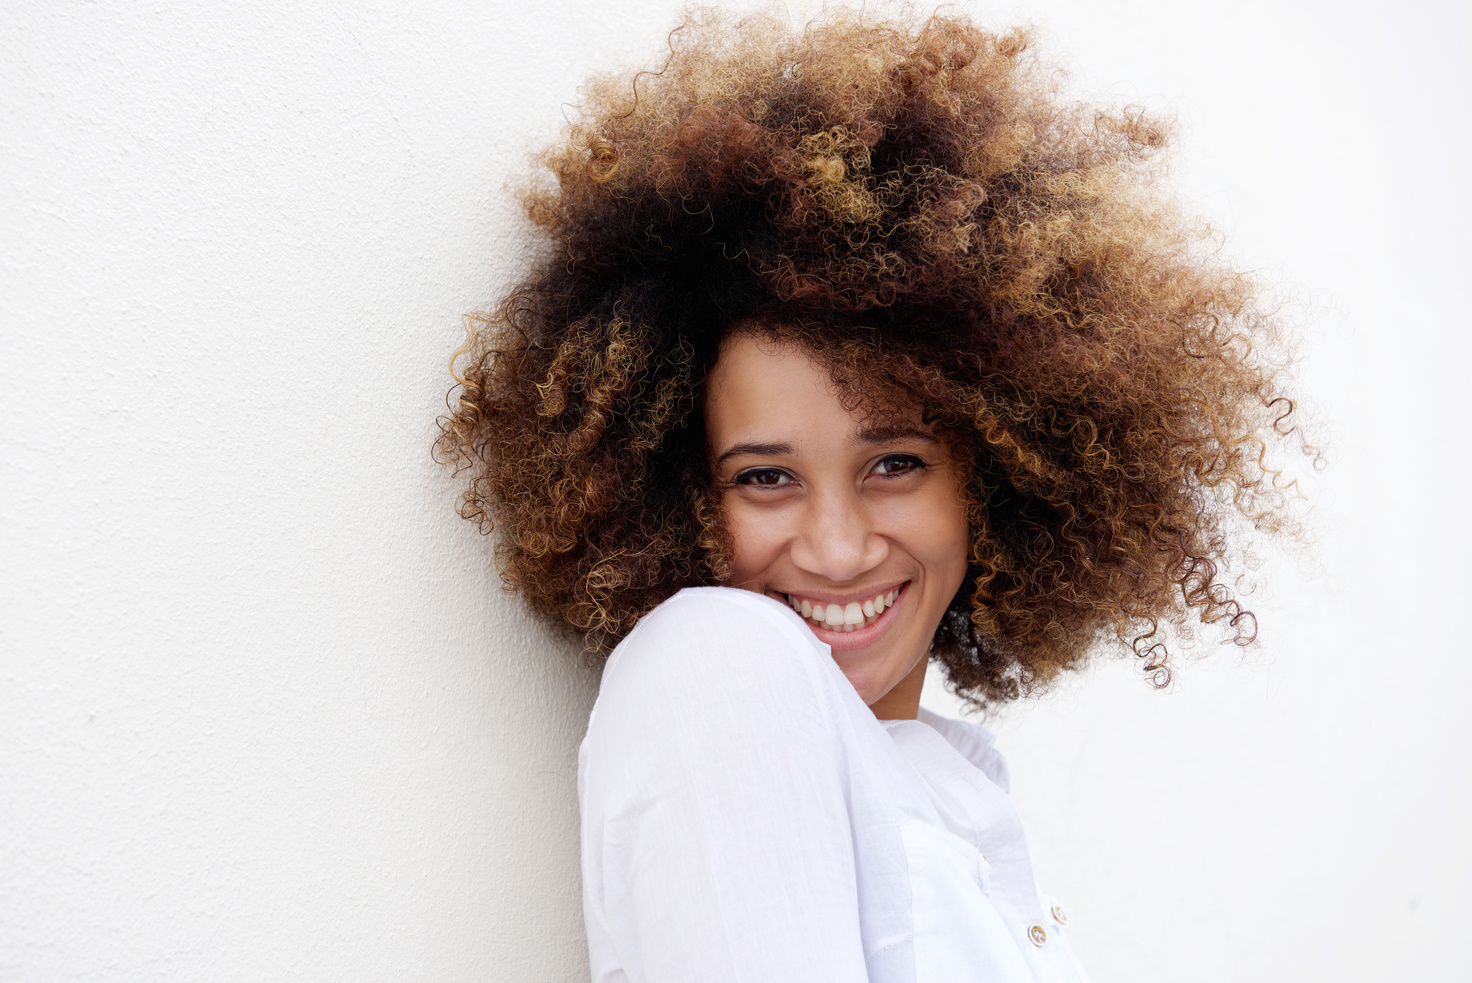 Young Woman Smiling with Afro Hair against White Background